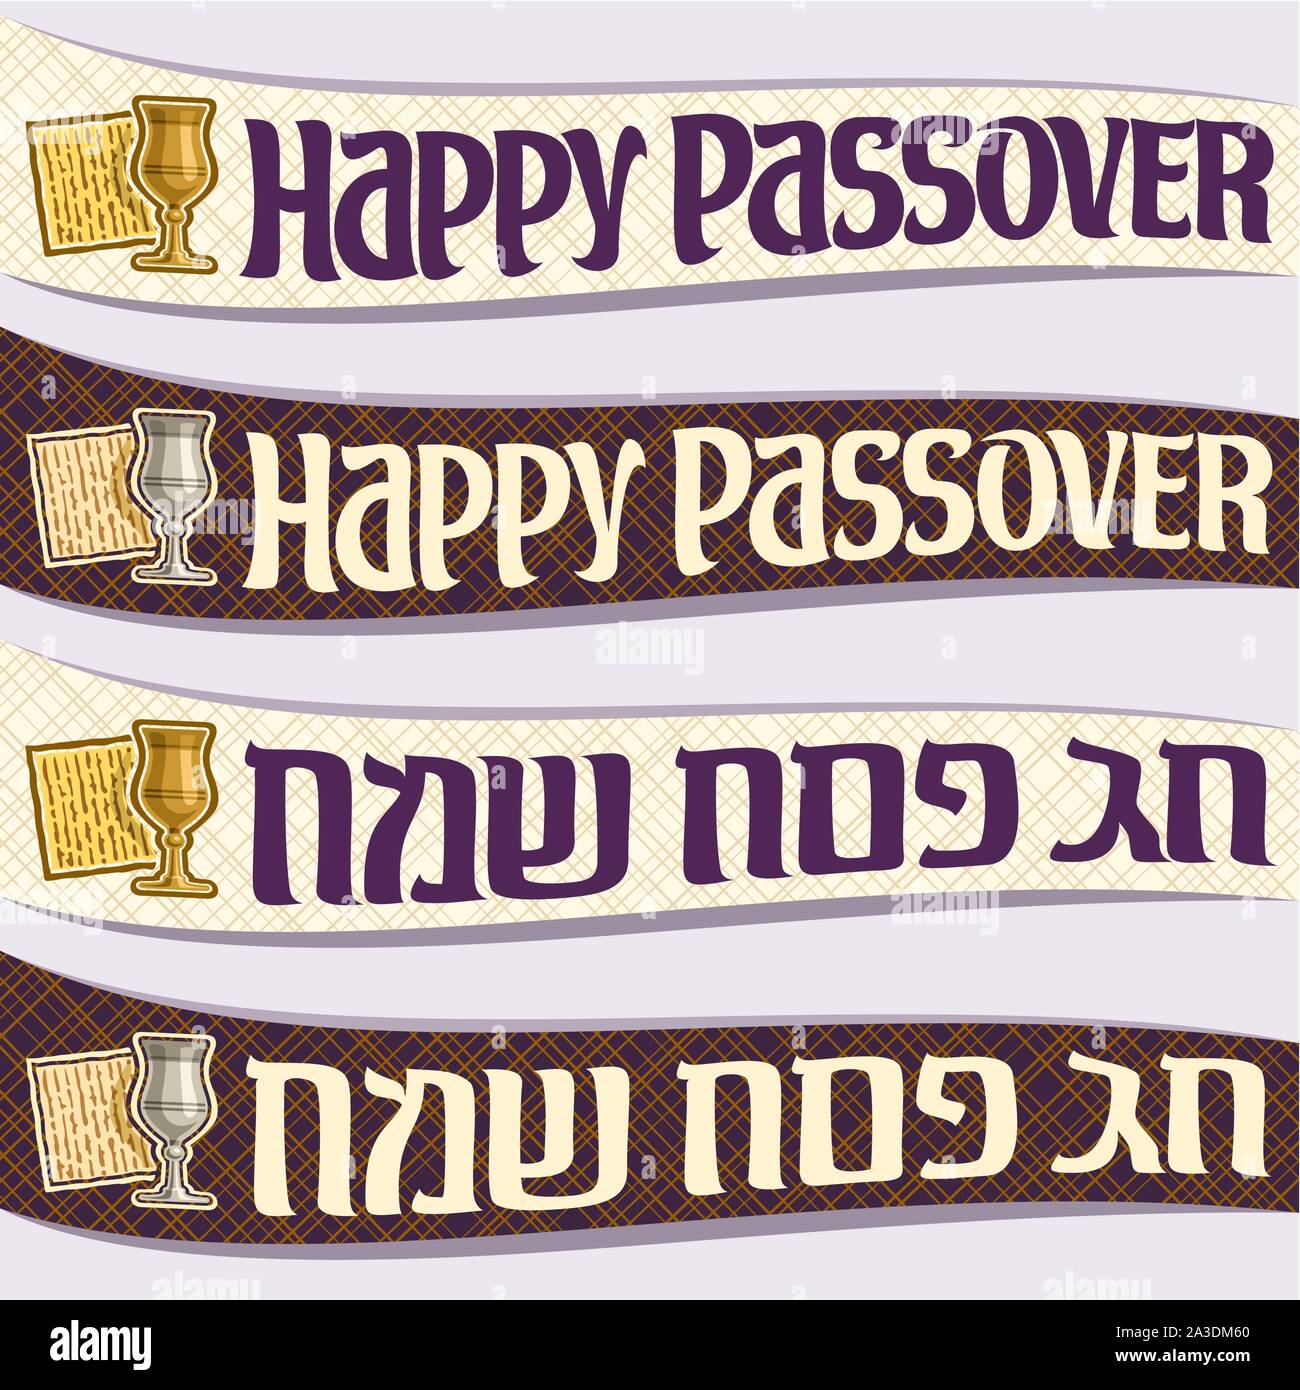 Vector set of ribbons for Passover holiday, curved banners with decorative handwritten font for text happy passover in hebrew, kosher flatbread matzah Stock Vector